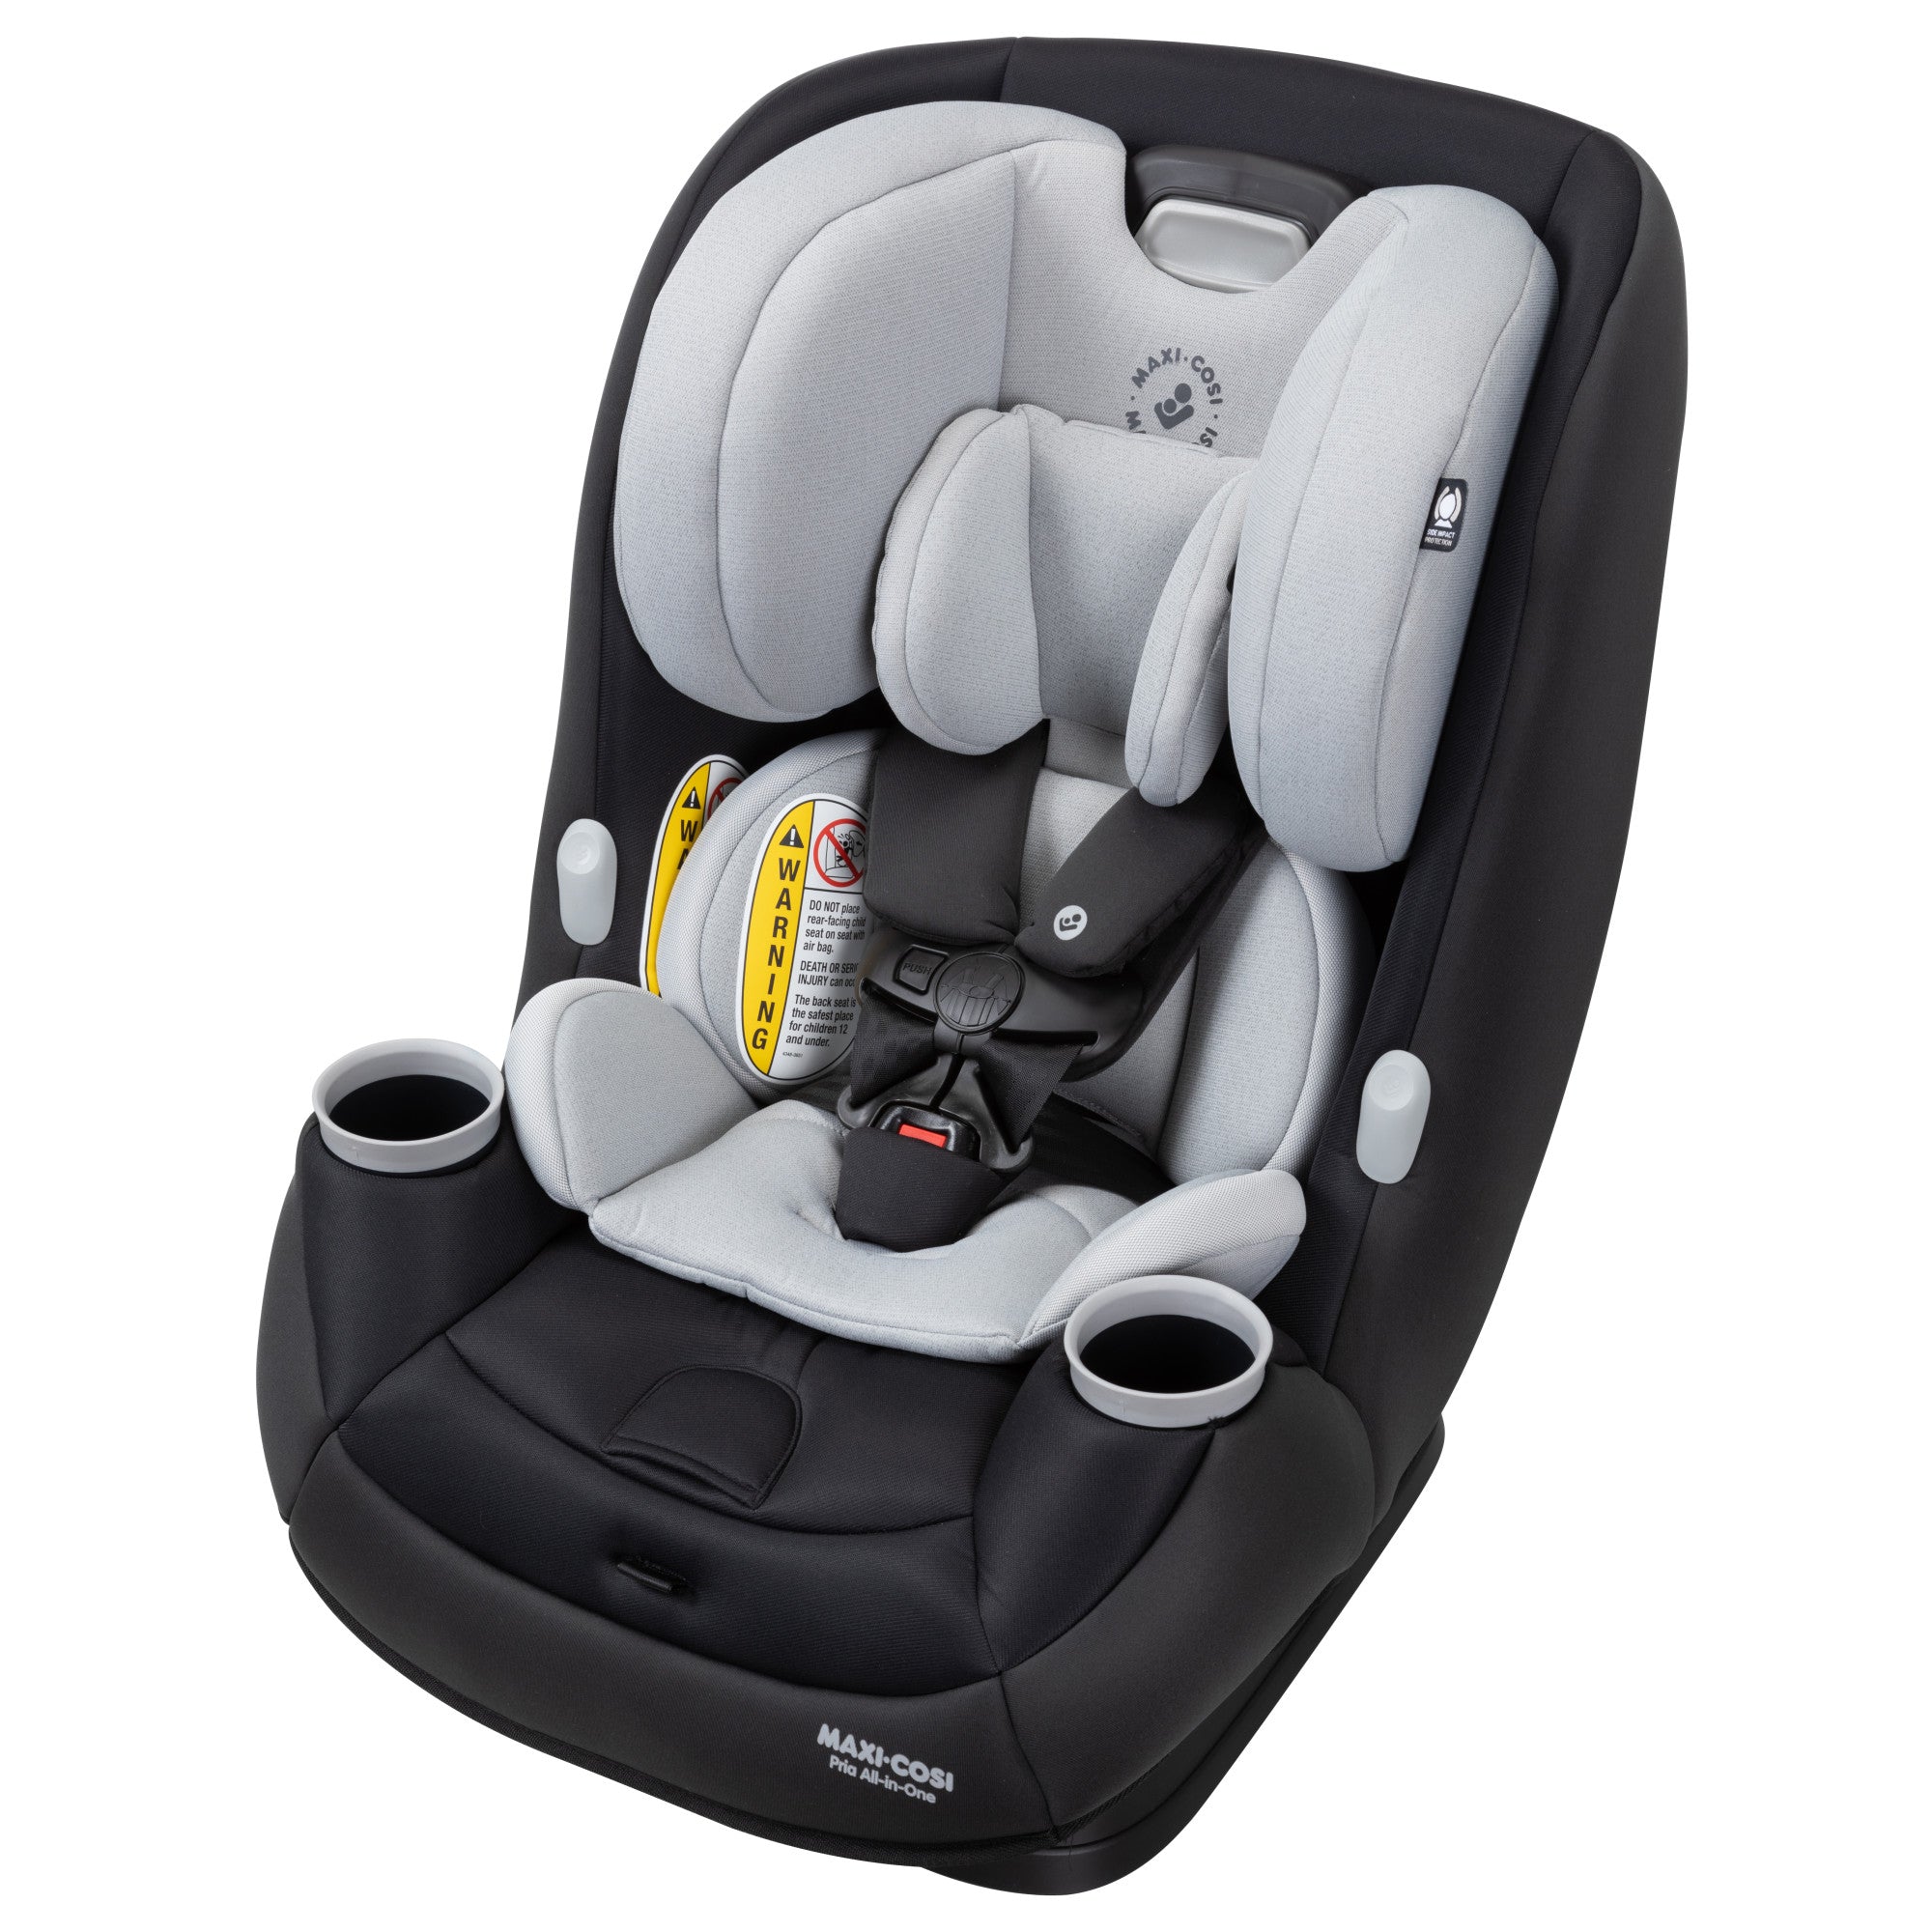  Pria Convertible Car Seat in Color Black, Called AfterDark – PureCosi